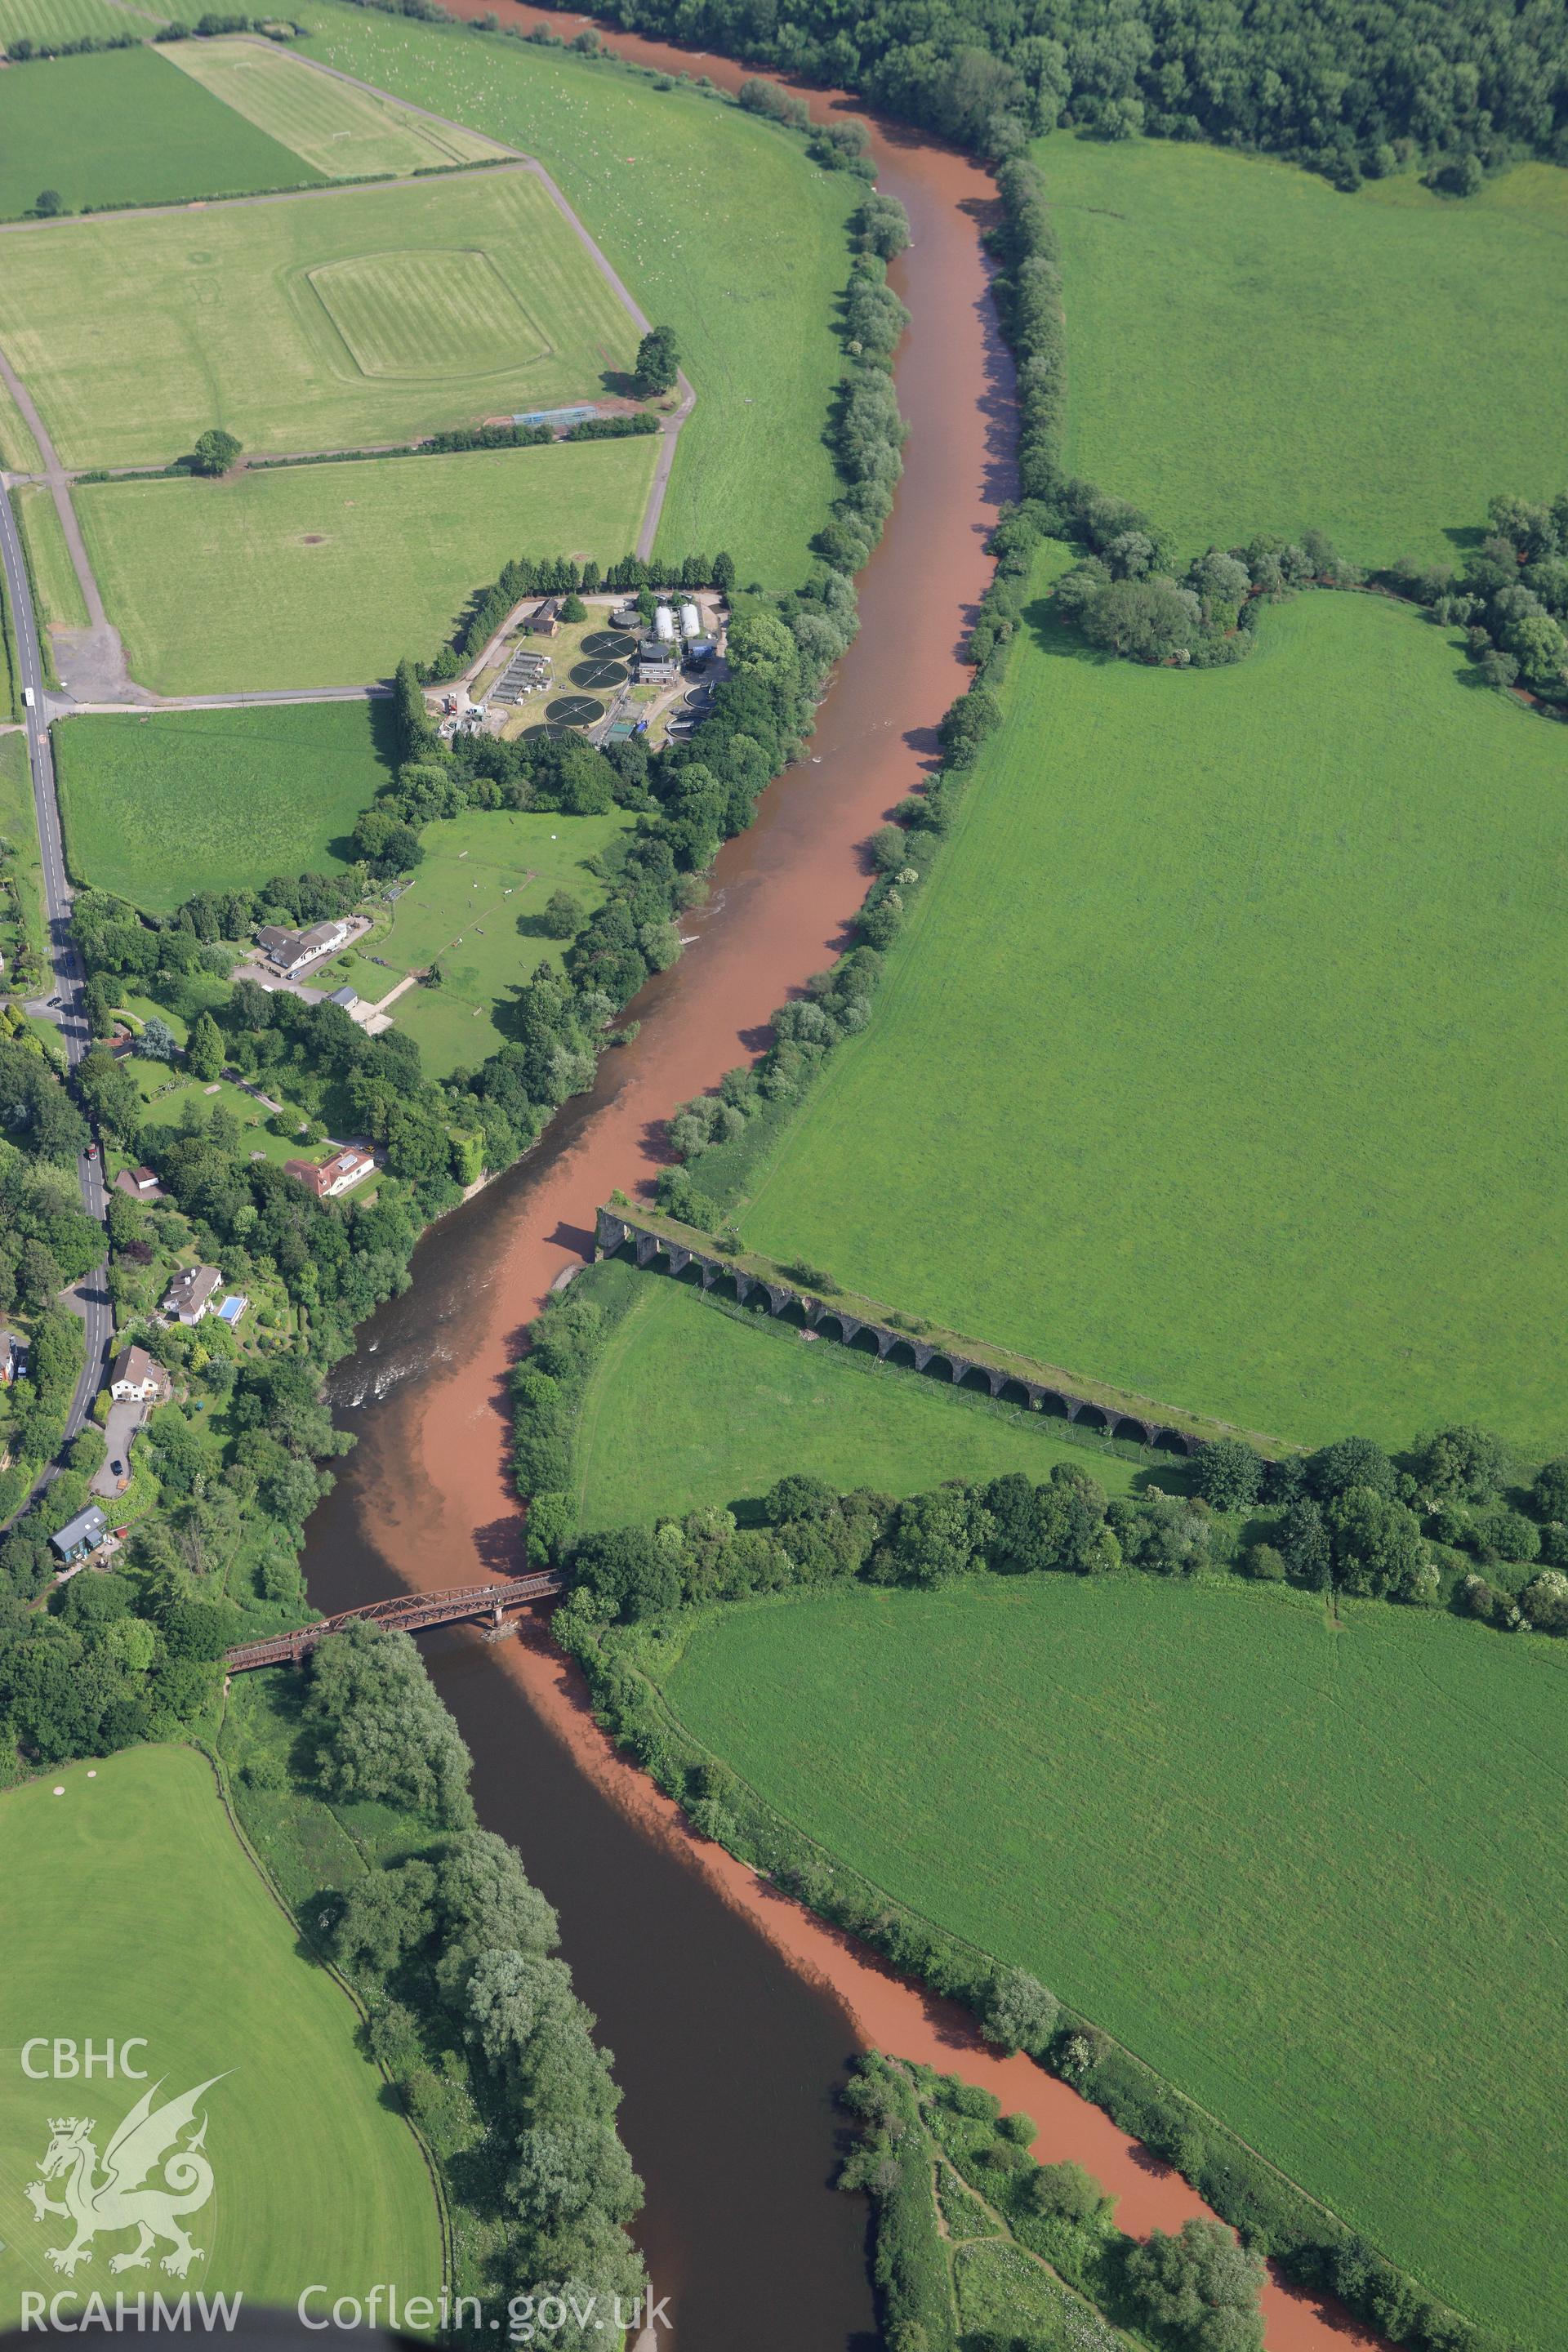 RCAHMW colour oblique aerial photograph of river patterns close to the Wye Bridge on the Hereford, Ross and Gloucester Railway in Monmouth. Taken on 11 June 2009 by Toby Driver